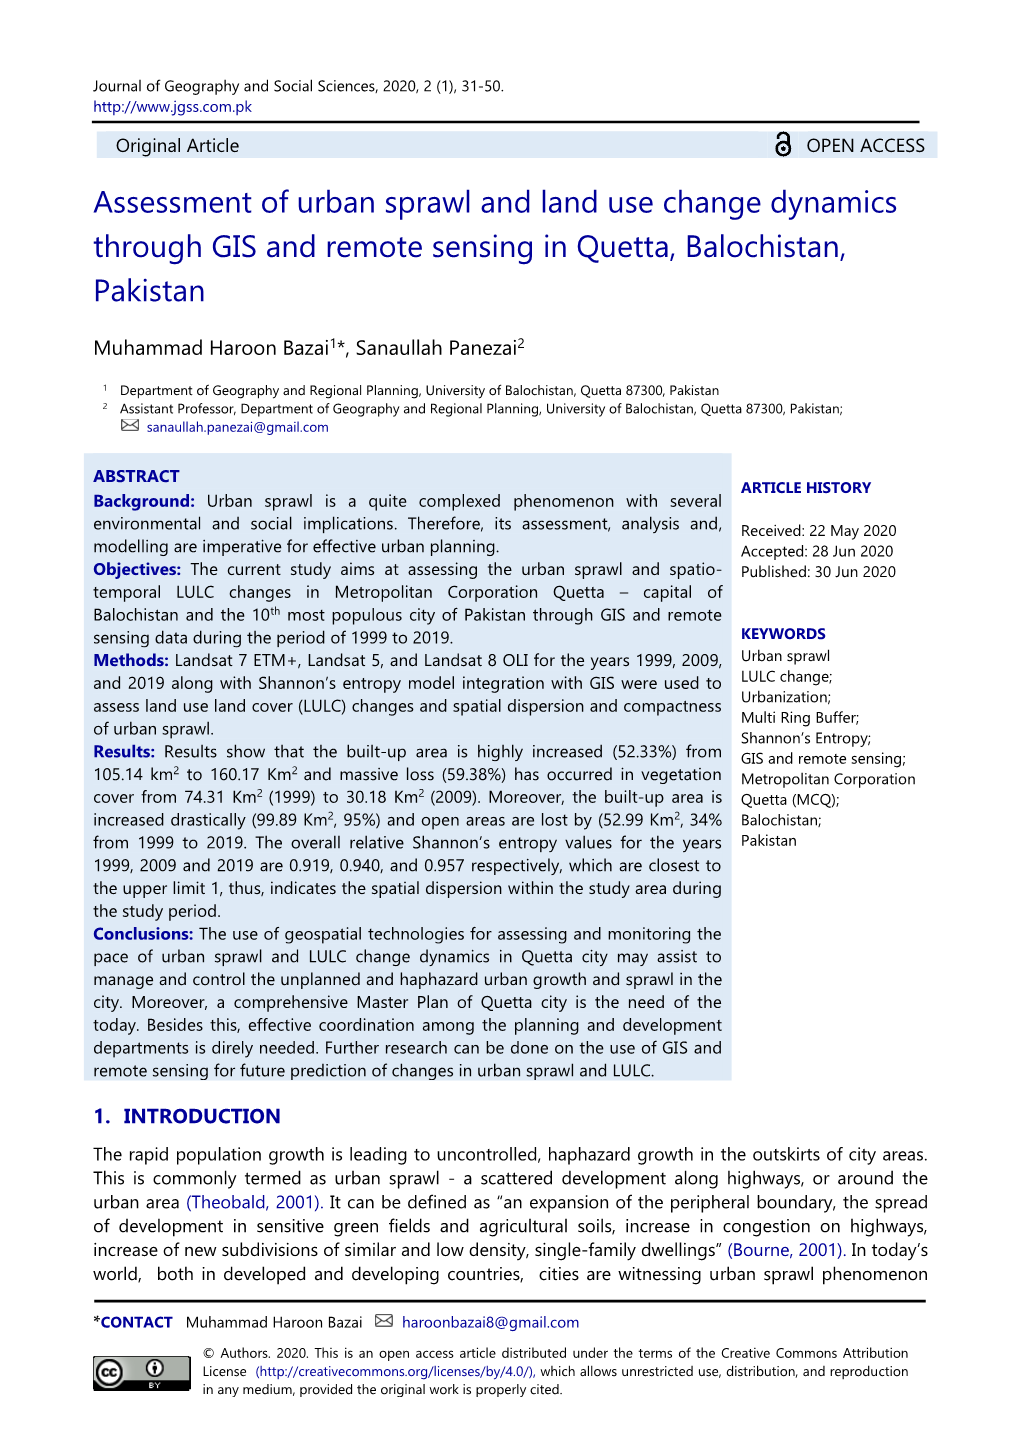 Assessment of Urban Sprawl and Land Use Change Dynamics Through GIS and Remote Sensing in Quetta, Balochistan, Pakistan